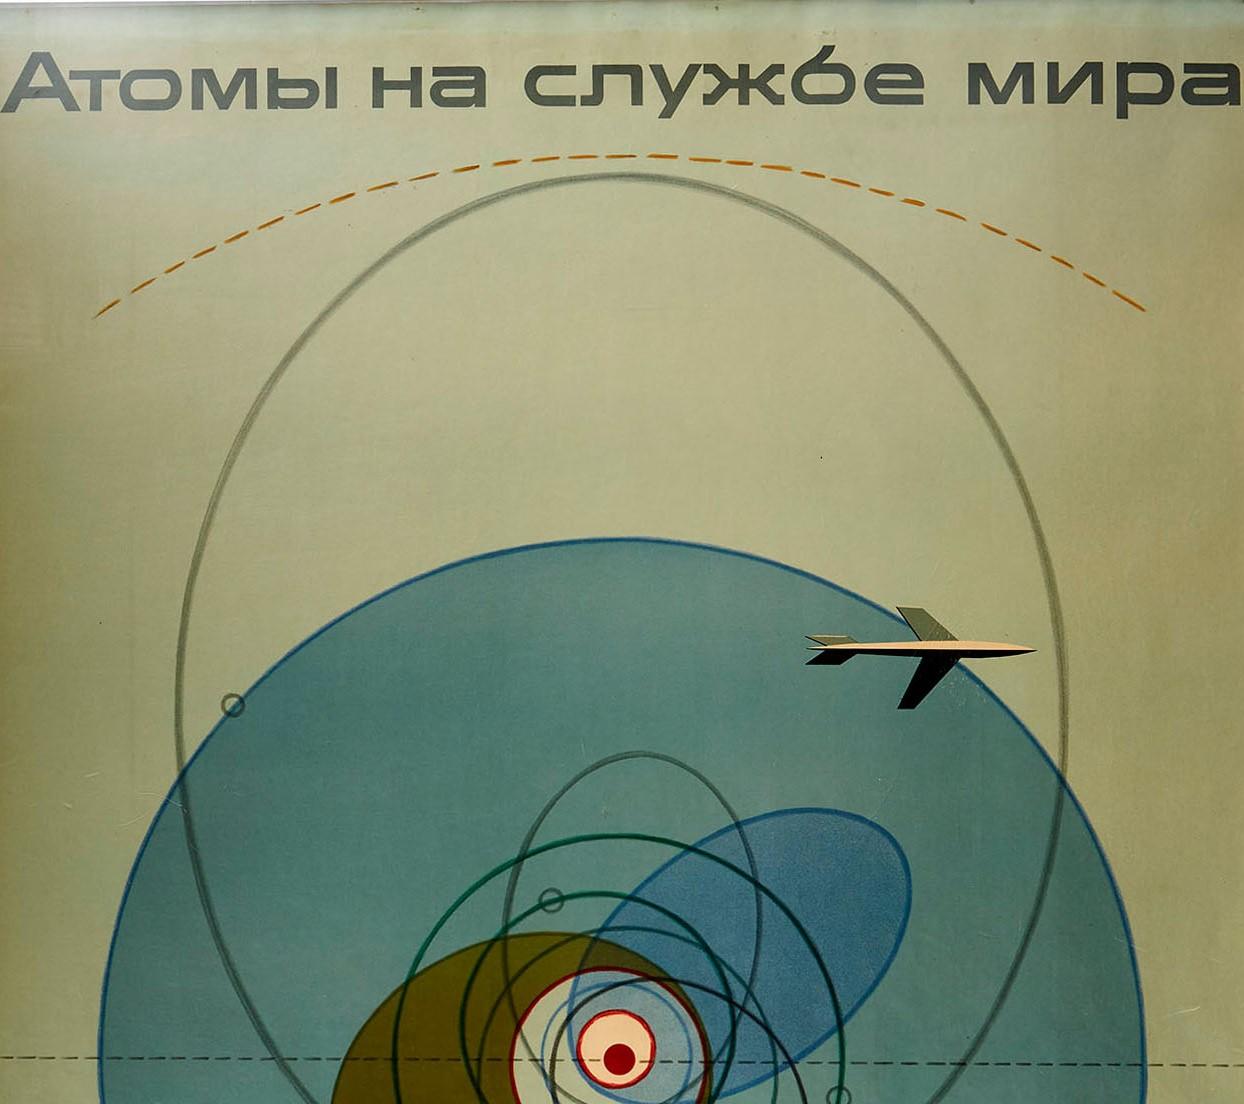 Original vintage General Dynamics poster by the illustrator, typographer and graphic designer Erik Nitsche (1908-1998) promoting Astrodynamics. Great illustration featuring a plane flying over a diagram representing astrodynamics against a grey